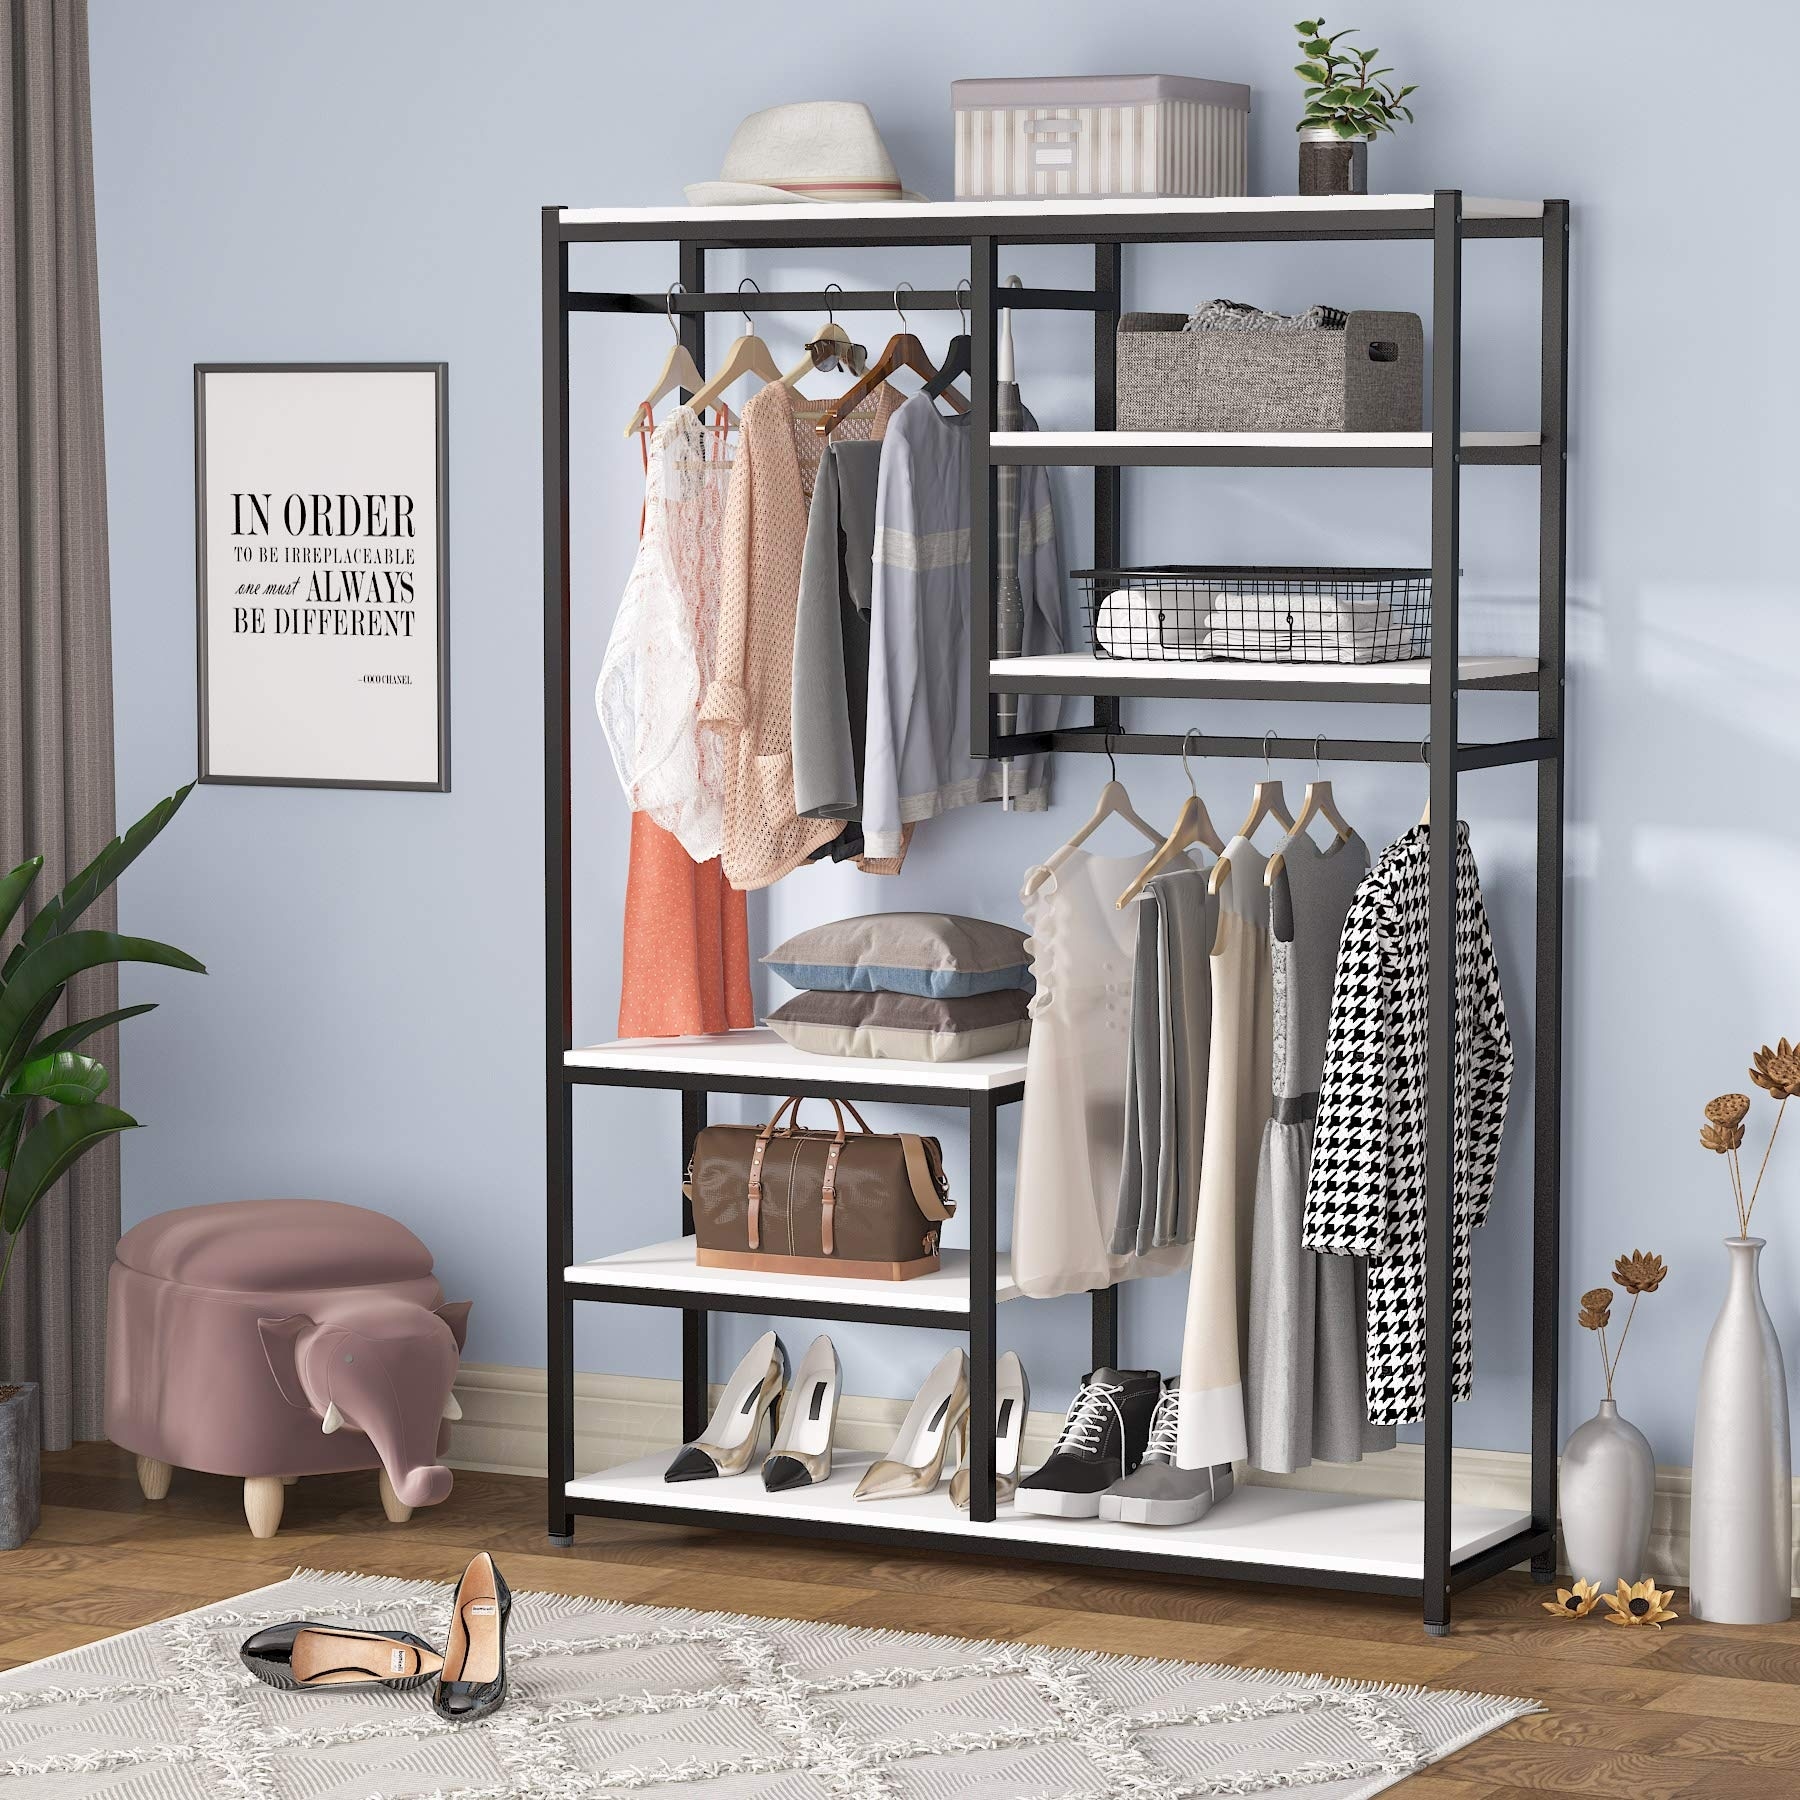 https://ak1.ostkcdn.com/images/products/is/images/direct/a290aadc124cdf84872bdb9bb41edc83279c2517/Freestanding-Closet-Organizer-Garment-Rack-with-Hanging-Rod-and-Storage-Shelf.jpg